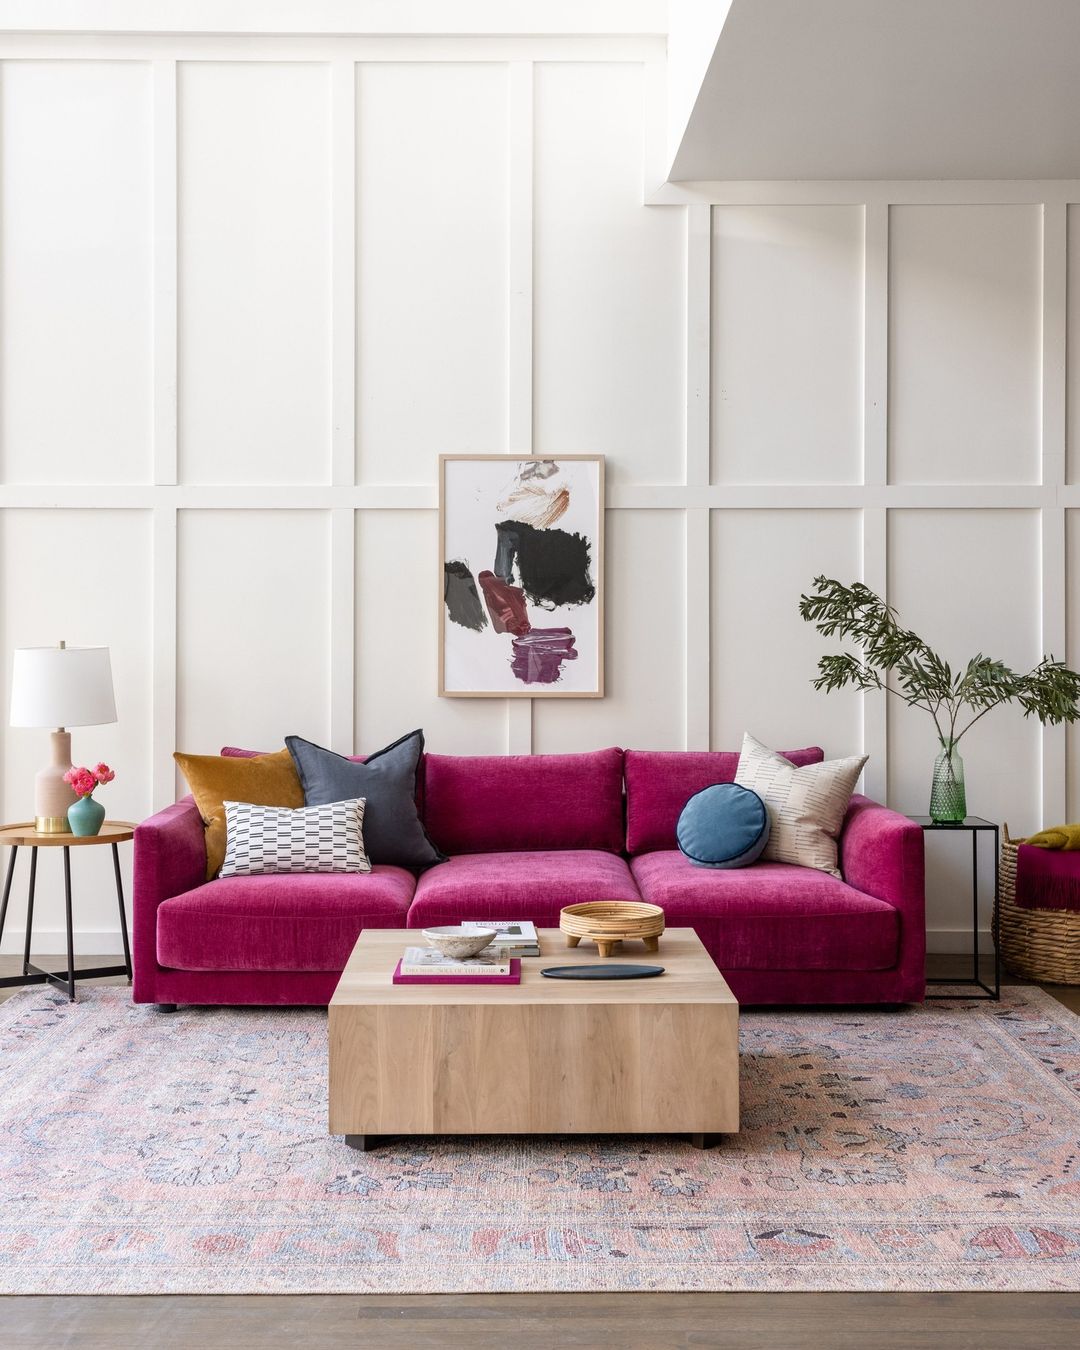 where to buy a pink couch - berry sofa against white wall